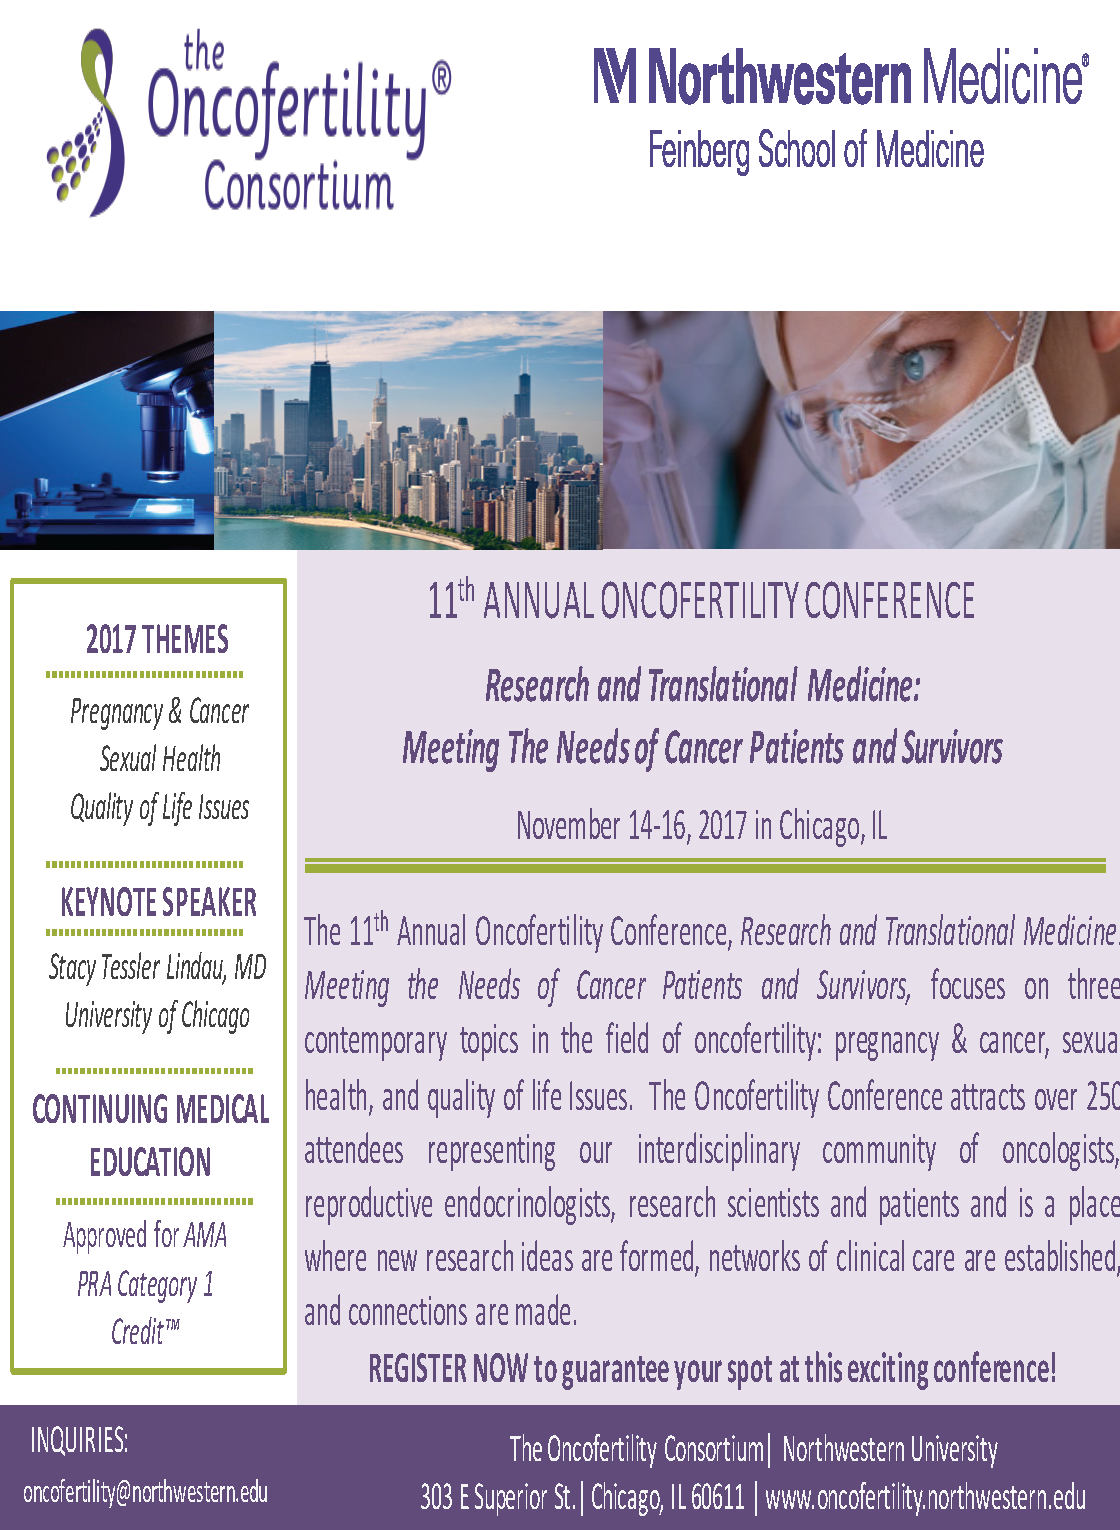 Annual Oncofertility Conference Registration